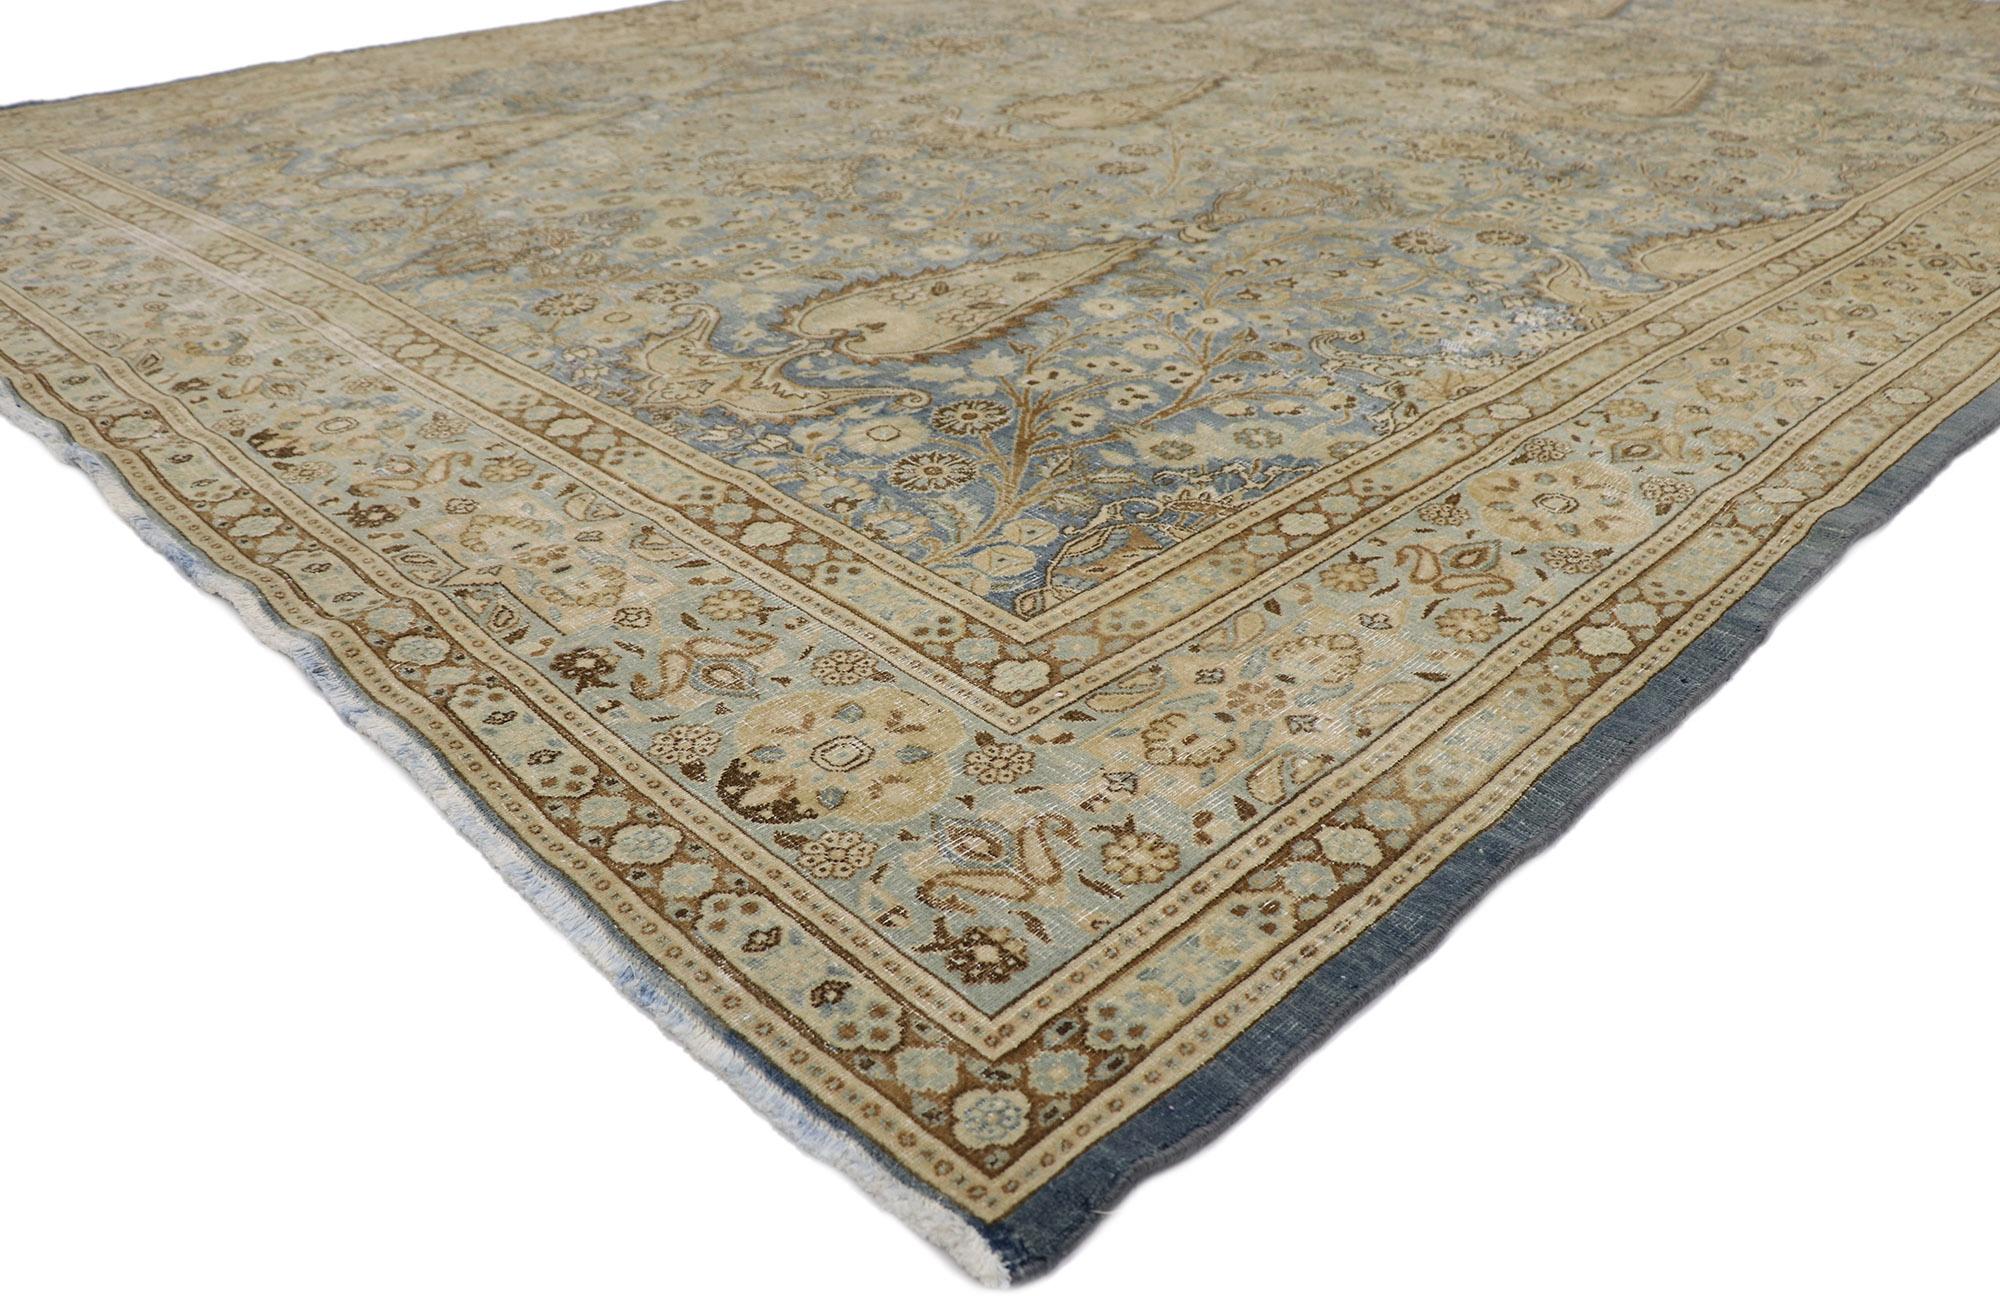 60937, distressed antique Persian Khorassan rug. Effortlessly chic and emanating coastal vibes with rustic sensibility, this hand knotted wool distressed antique Persian Khorassan rug beautifully is a captivating vision of woven beauty. The blue